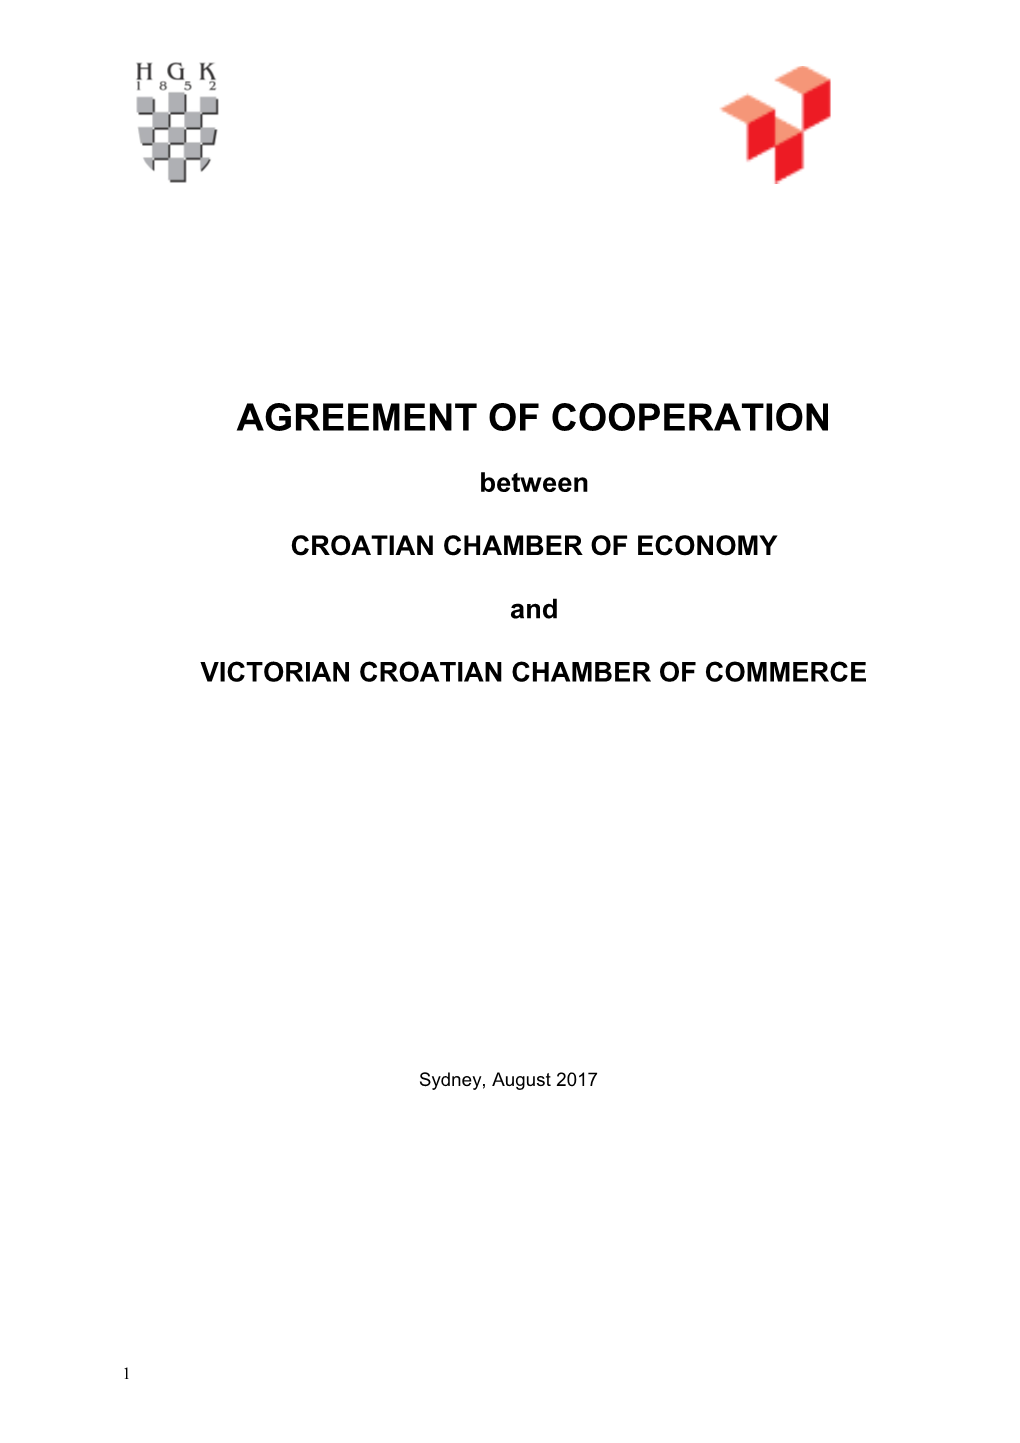 Agreement of Cooperation